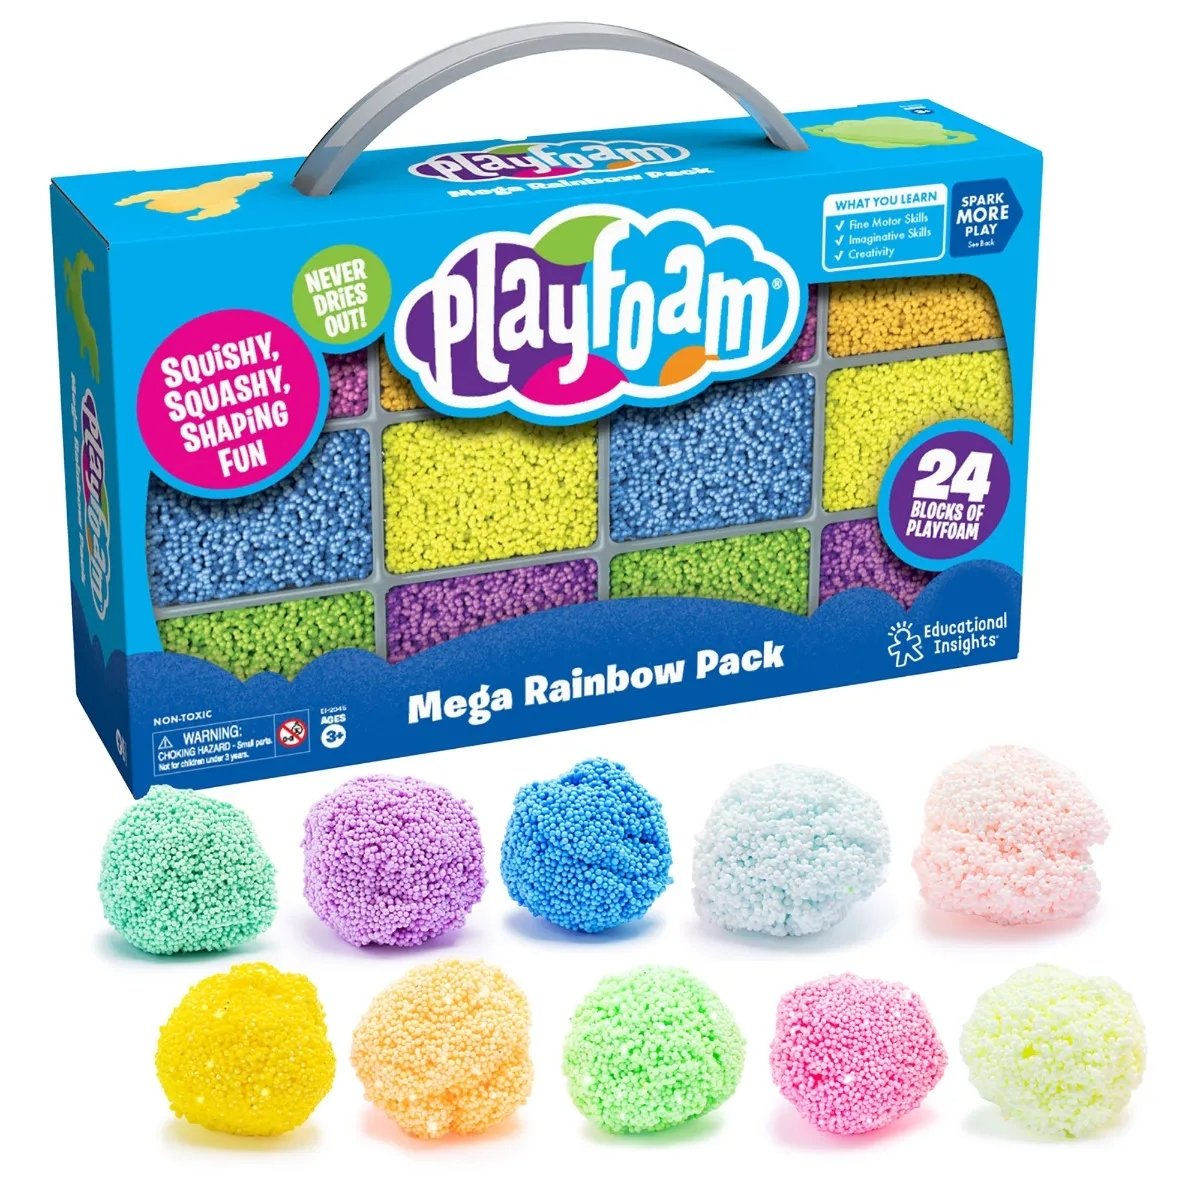 Playfoam Mega Rainbow Pack, Get even more creative with squishy, squashy, sensory-stimulating Playfoam in the biggest set weve made yet! The Playfoam Mega Rainbow Pack is ideal for creative play in a group setting, children can shape a heart, snowman, flower, and anything else that they can imagine. Playfoam never dries out so the squishing, sculpting, shaping fun never ends. Tactile Playfoam is also ideal for sensory bins. Give kids the sensory experience they can feel with the Playfoam Mega Rainbow pack! 